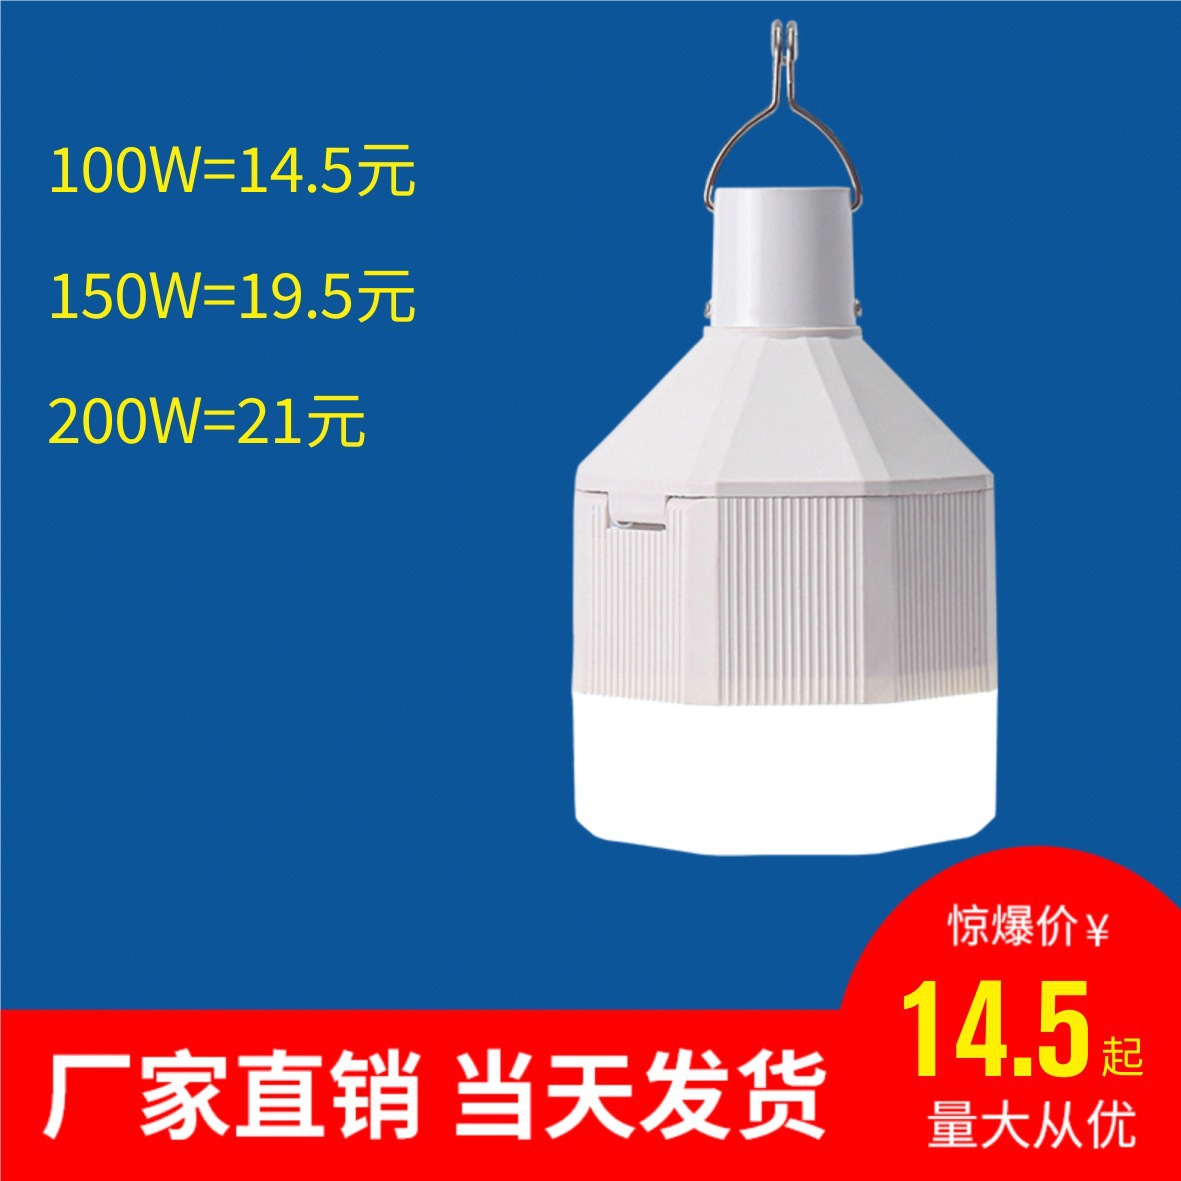 Led Emergency Light Usb Outdoor Charging Tent Camping Bulb Wholesale Night Market Stall Emergency Household Bulb